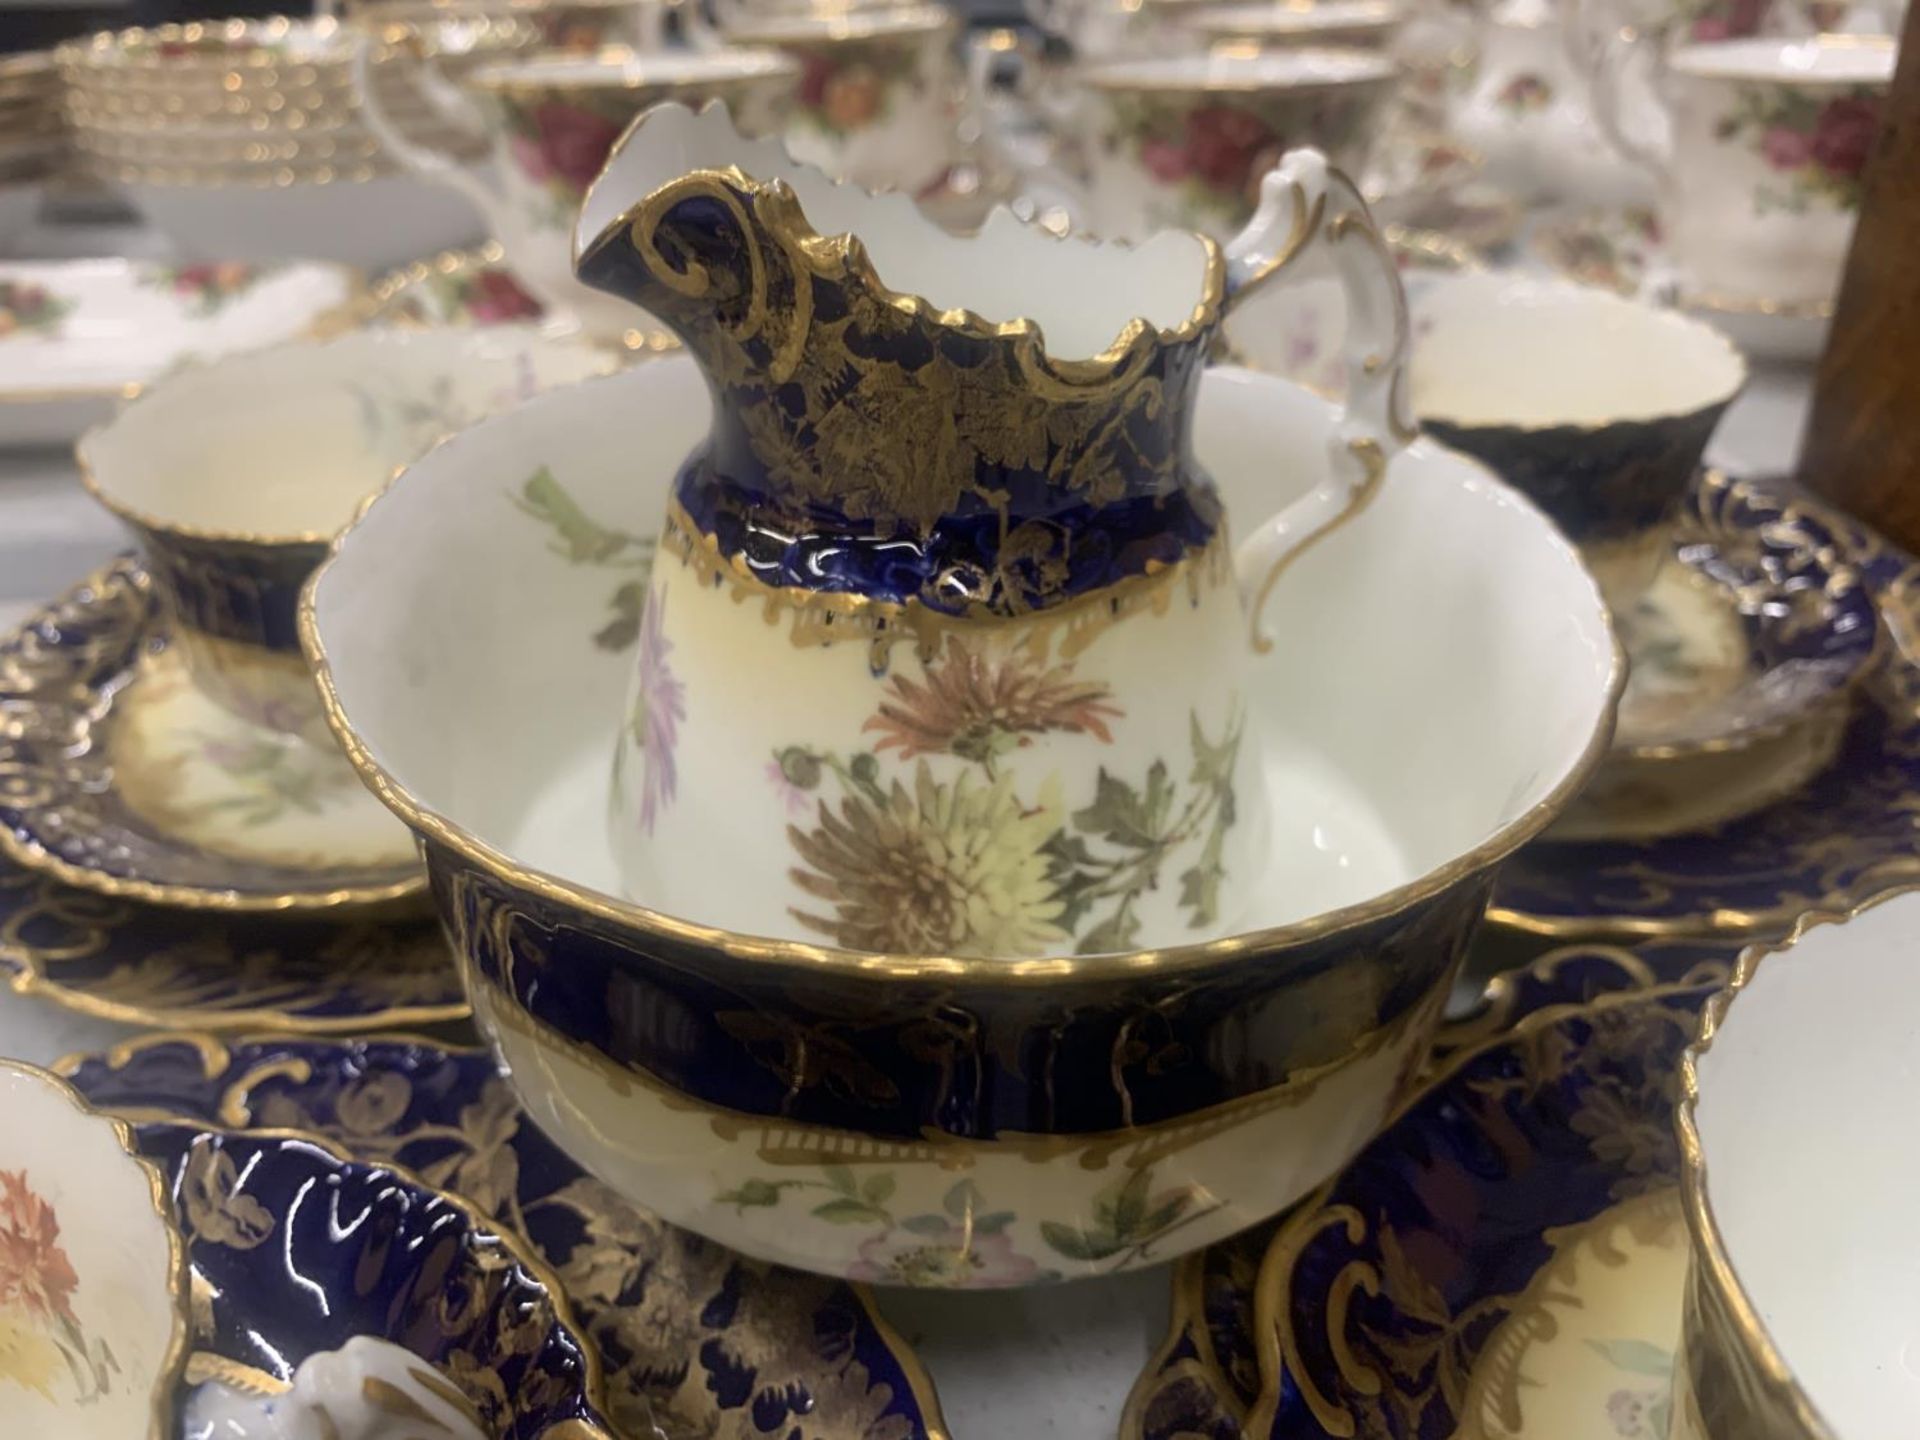 AN ANTIQUE CHINA TEASET TO INCLUDE A SUGAR BOWL, CREAM JUG, CUPS, SAUCERS, AND SIDE PLATES - Image 3 of 5